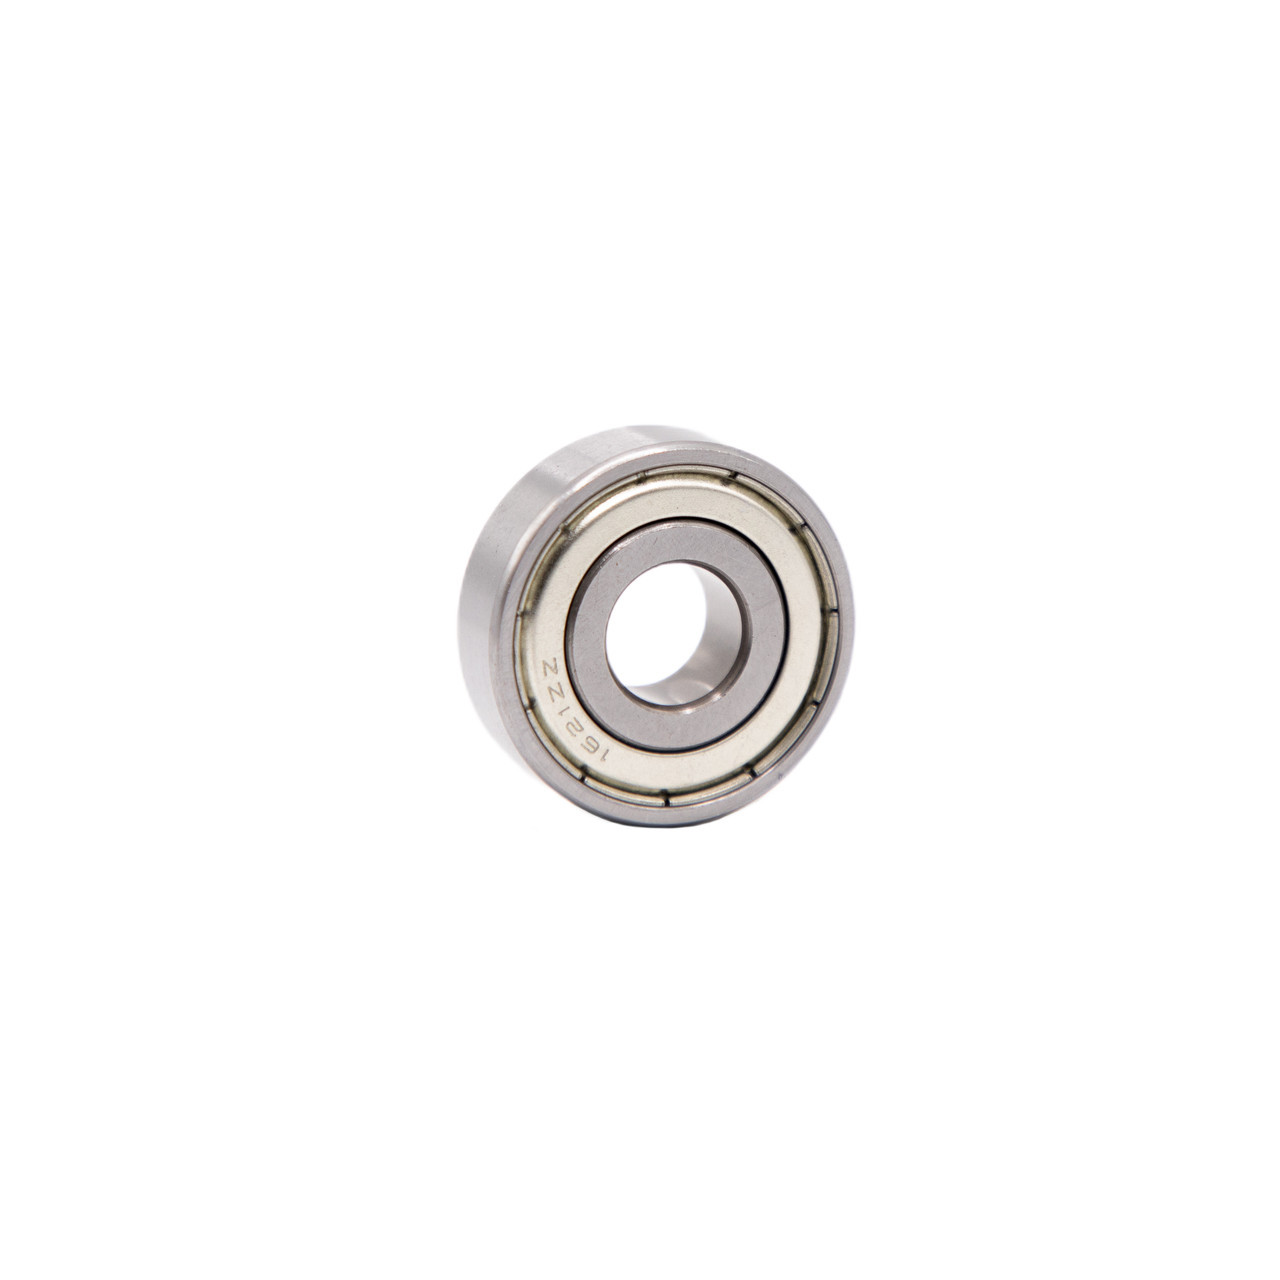 S1602-ZZ Stainless Steel Ball Bearing 1/4x11/16x1/4 Front View